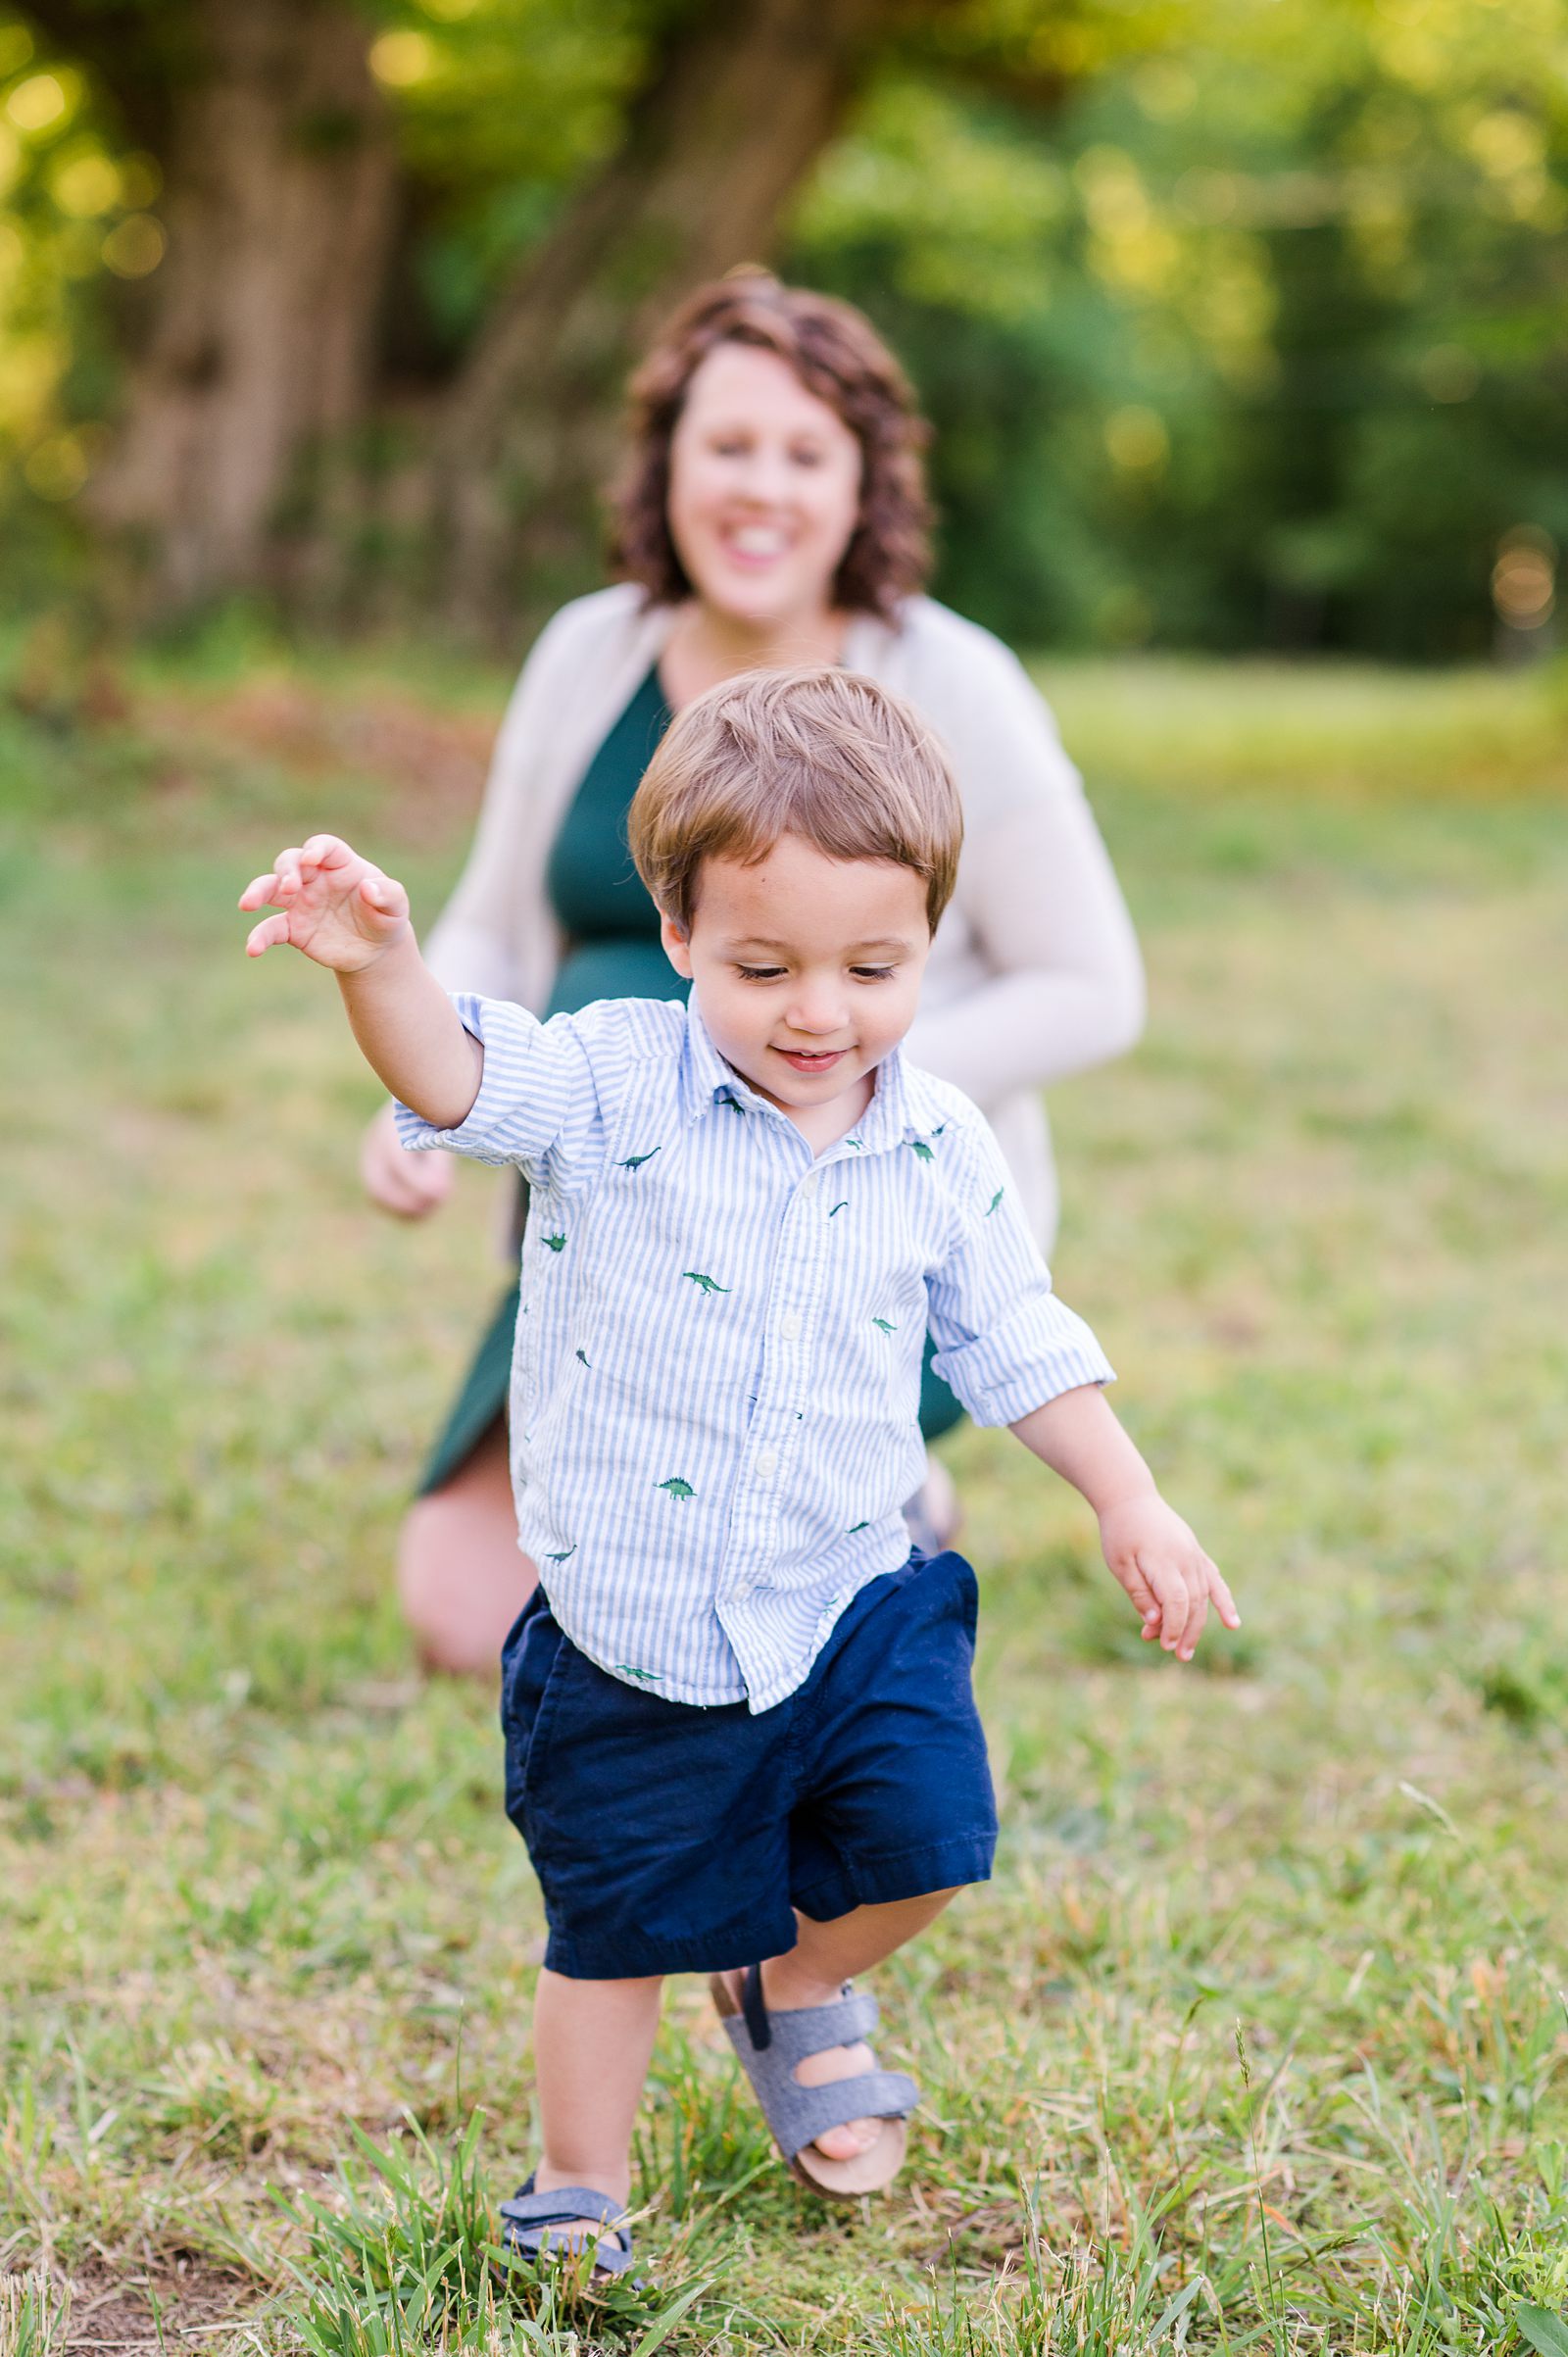 2020 Fun Mini Sessions in Richmond with Richmond Family Photographer Kailey Brianne Photography. 